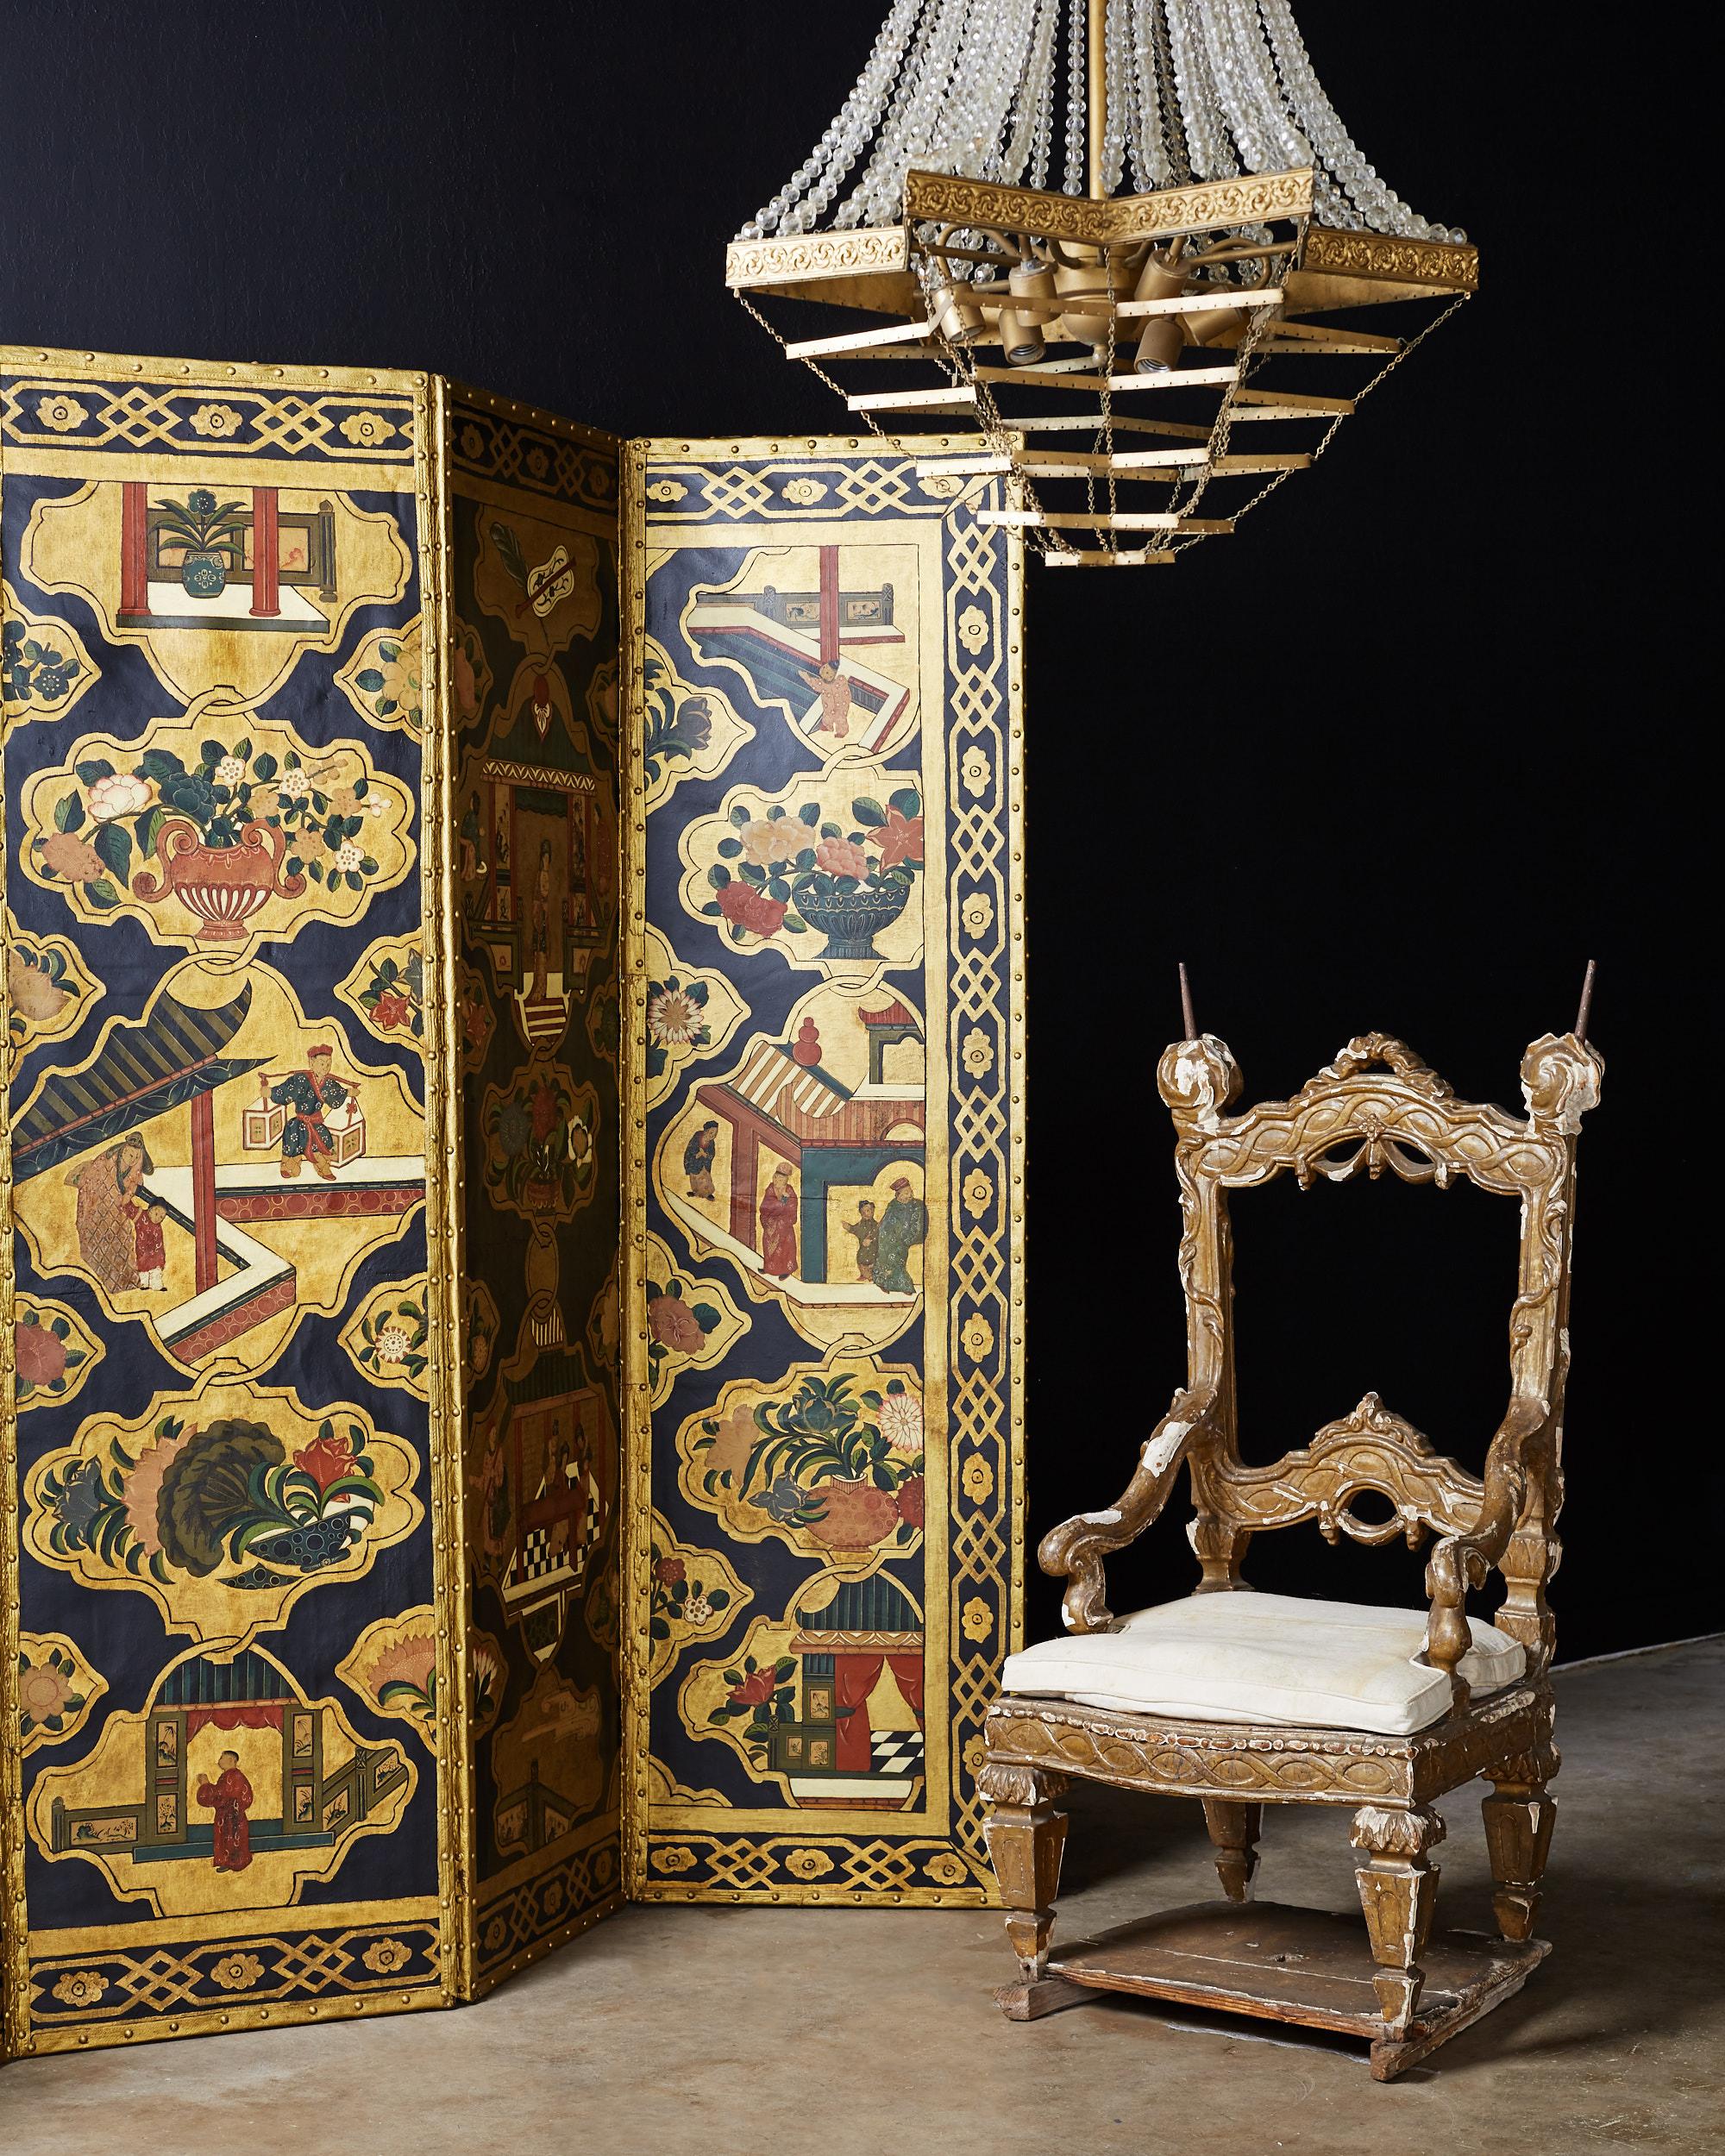 Majestic 18th century Venetian parade procession chair also known as a kings chair, sedan chair, throne chair, or litter. Made to be mounted on poles and carried by porters in front and behind. Constructed in the neoclassical taste with elaborate